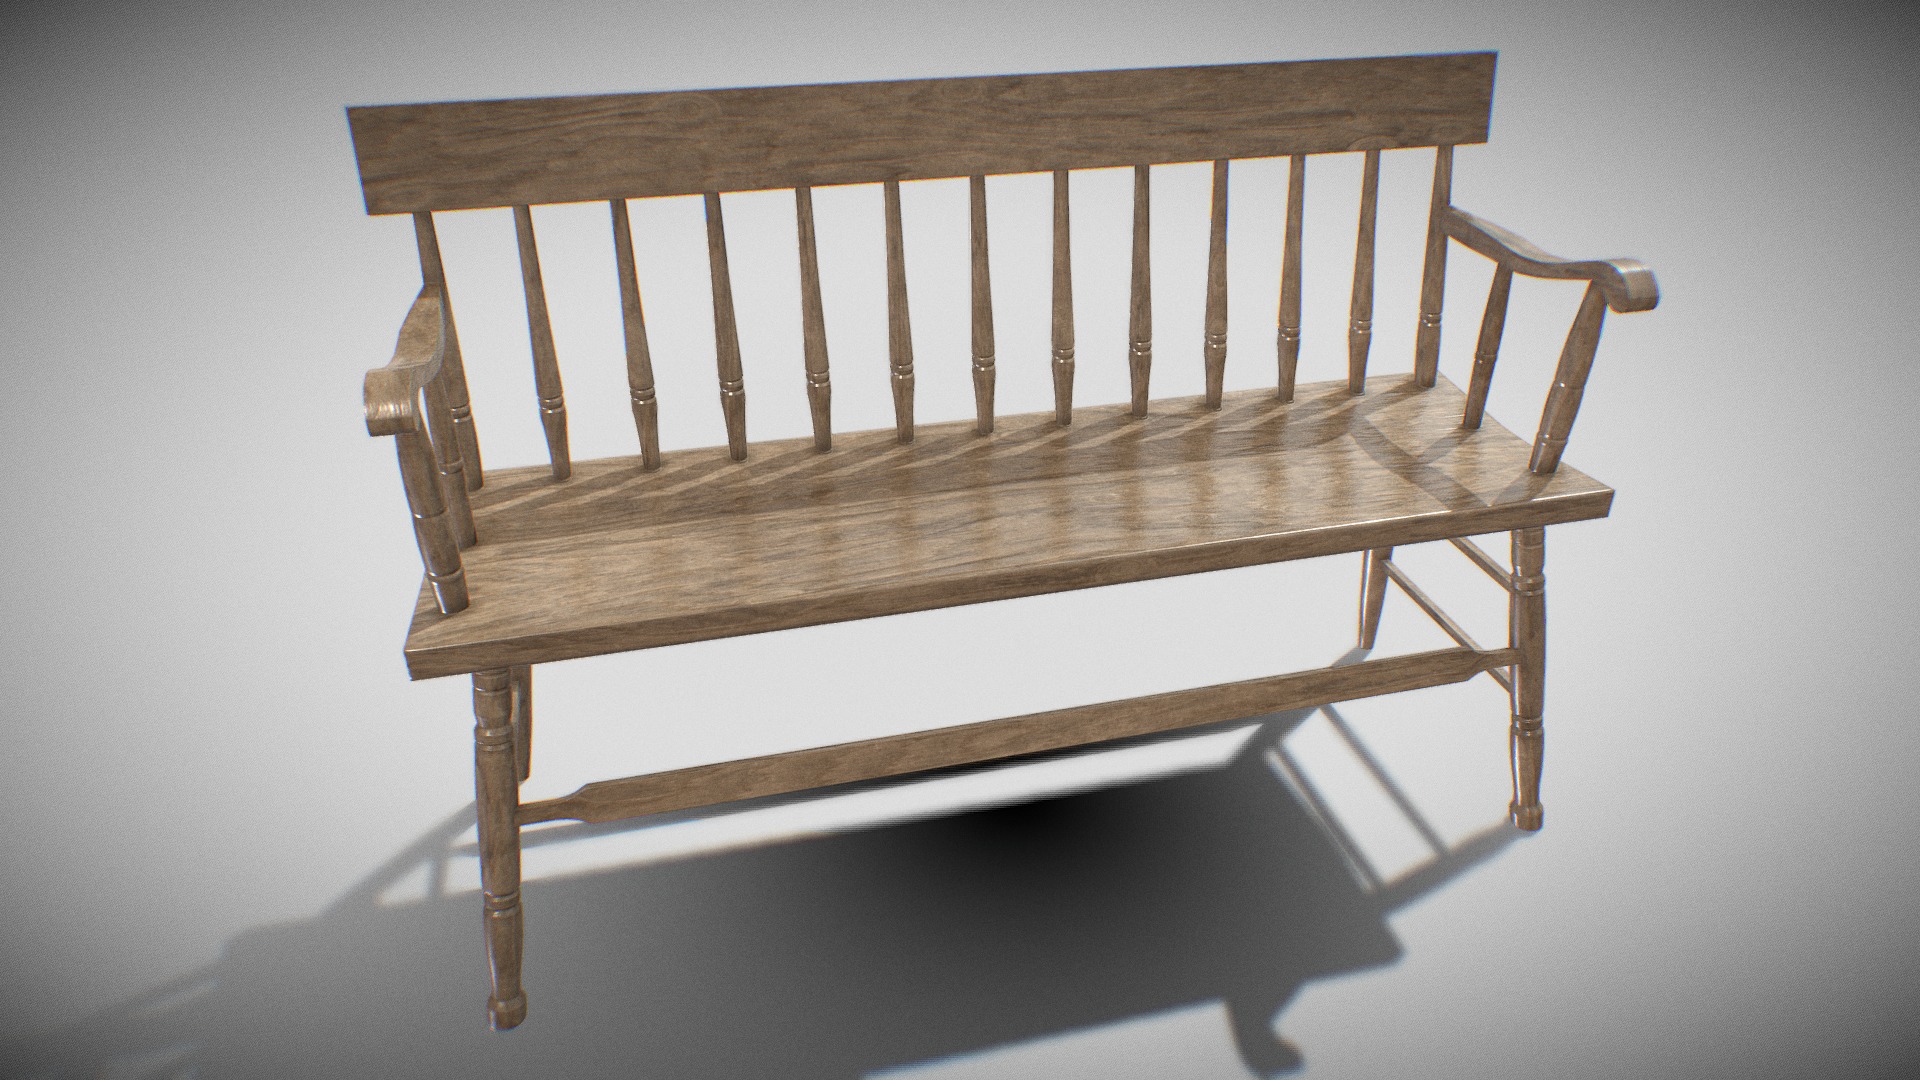 3D model Furniture Bench V-04 - This is a 3D model of the Furniture Bench V-04. The 3D model is about a wooden bench with a shadow.